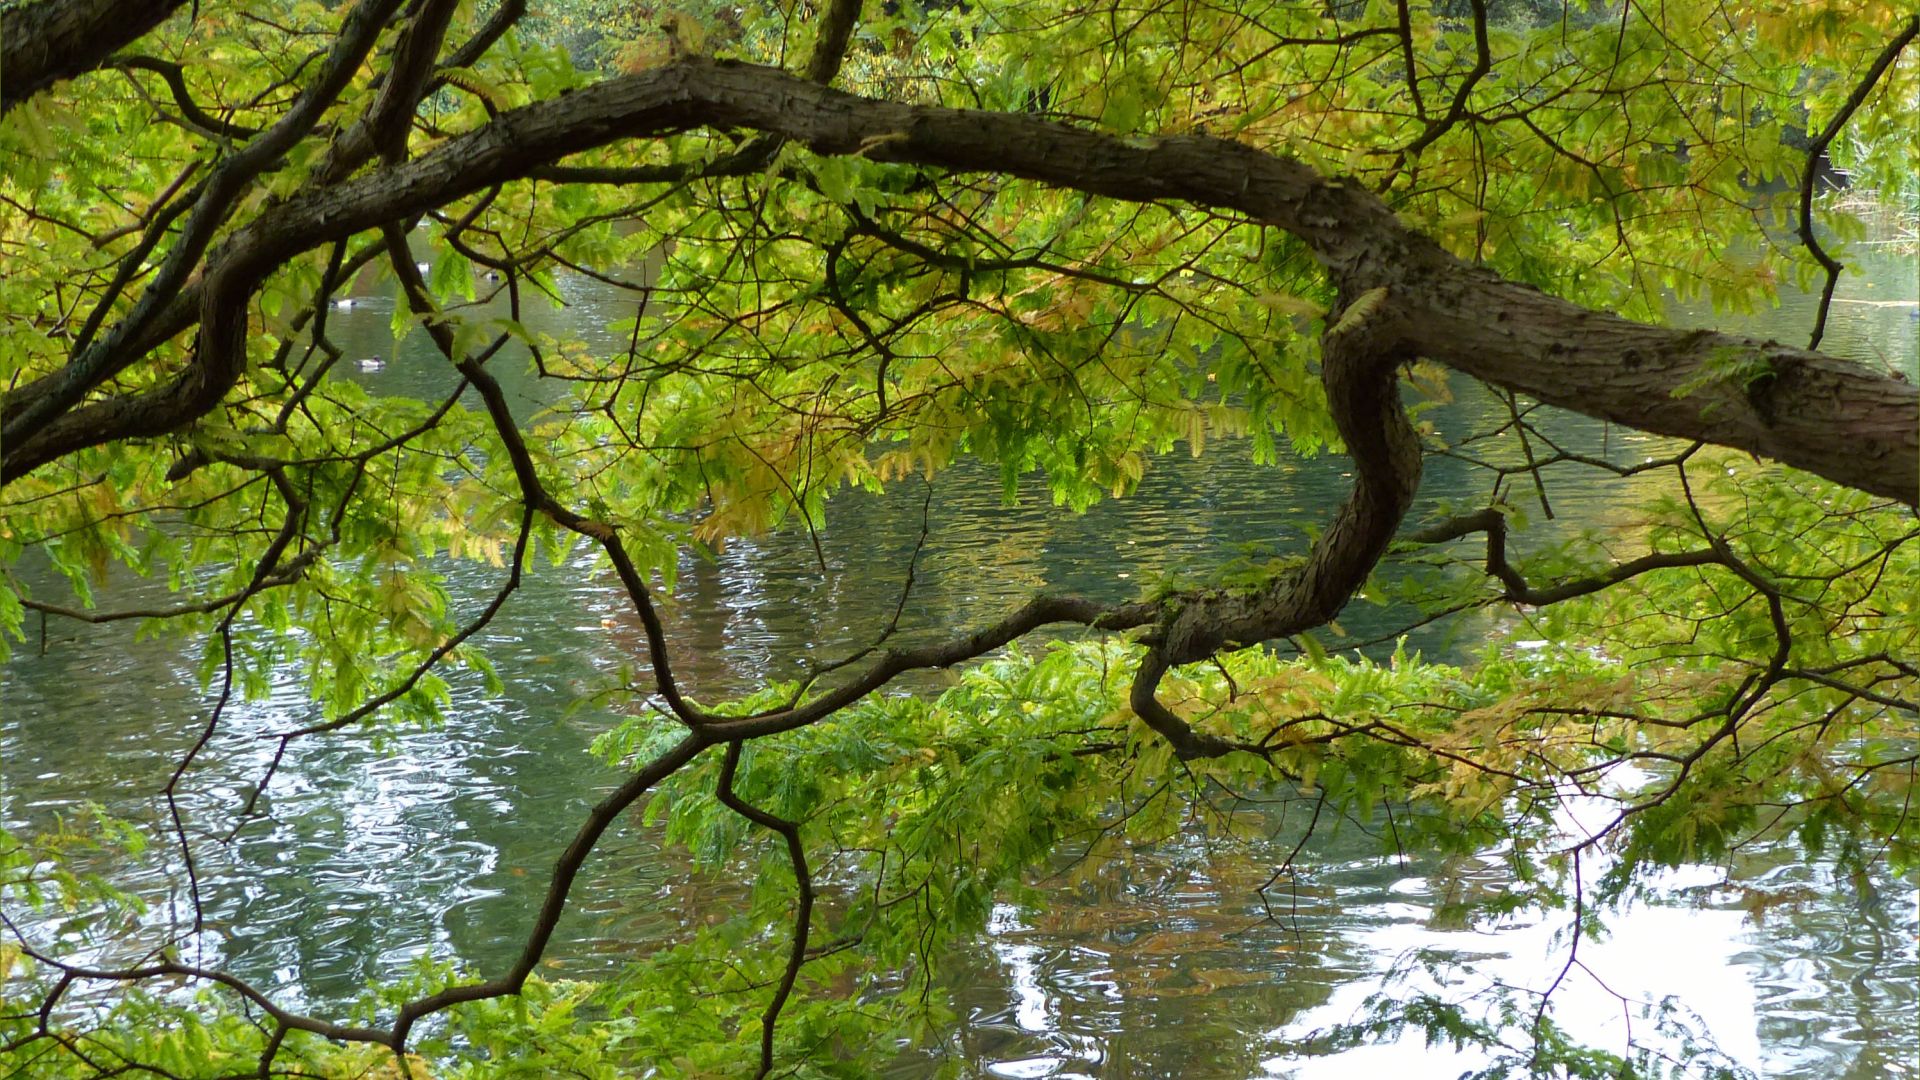 Lakeside view through the branches of a tree at Kew Gardens